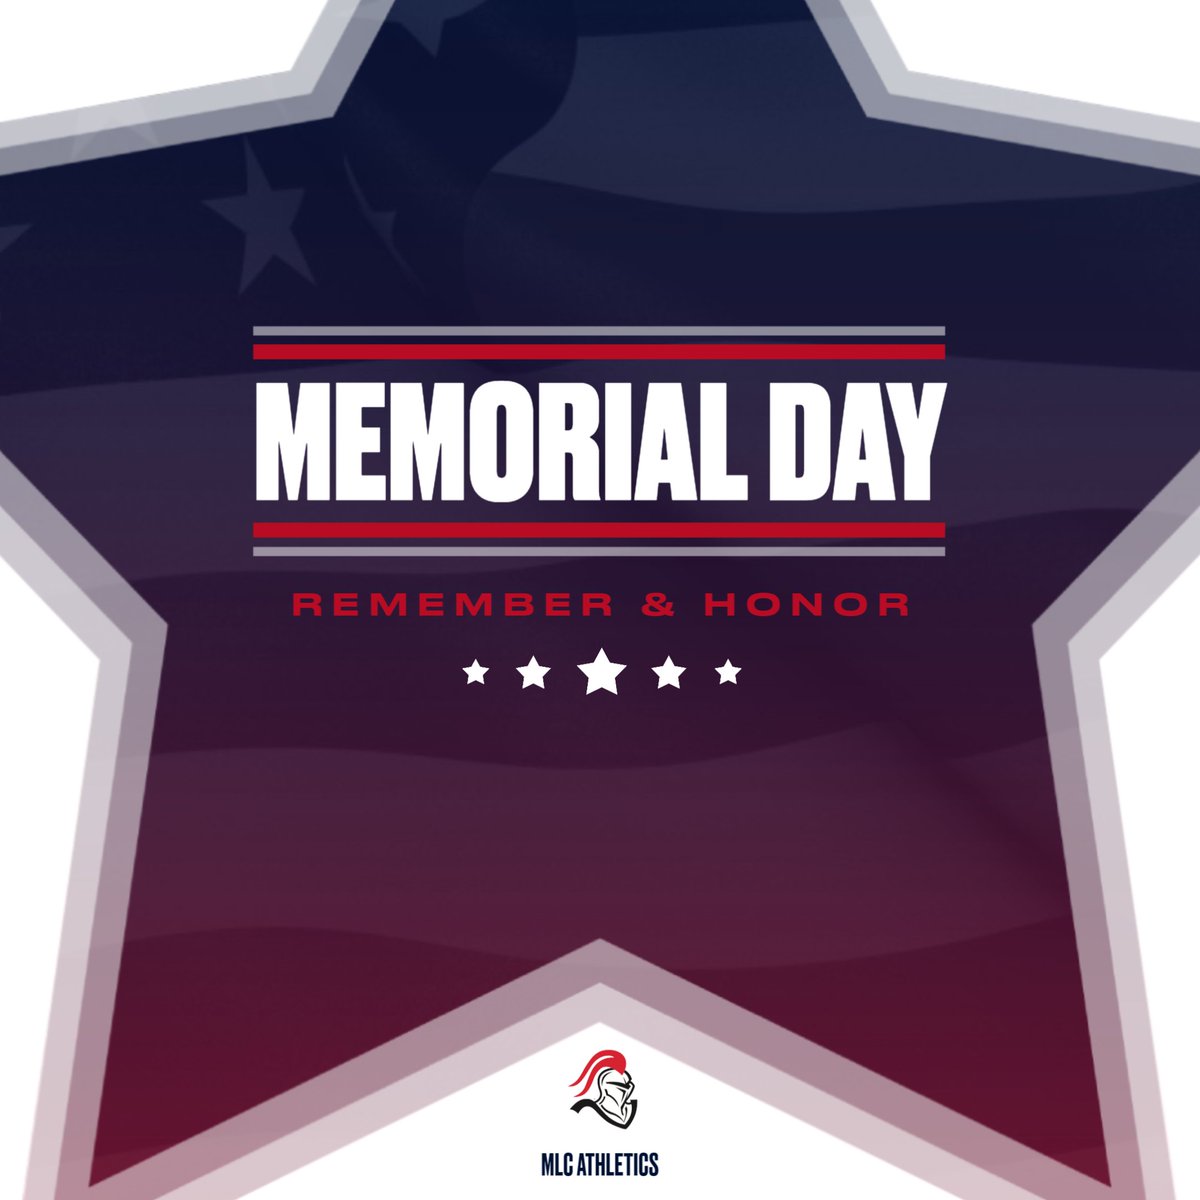 Happy Memorial Day from MLC athletics! Thank you to the brave men and women who have made the ultimate sacrifice for our freedom.

God bless!

#starsandstripesforever